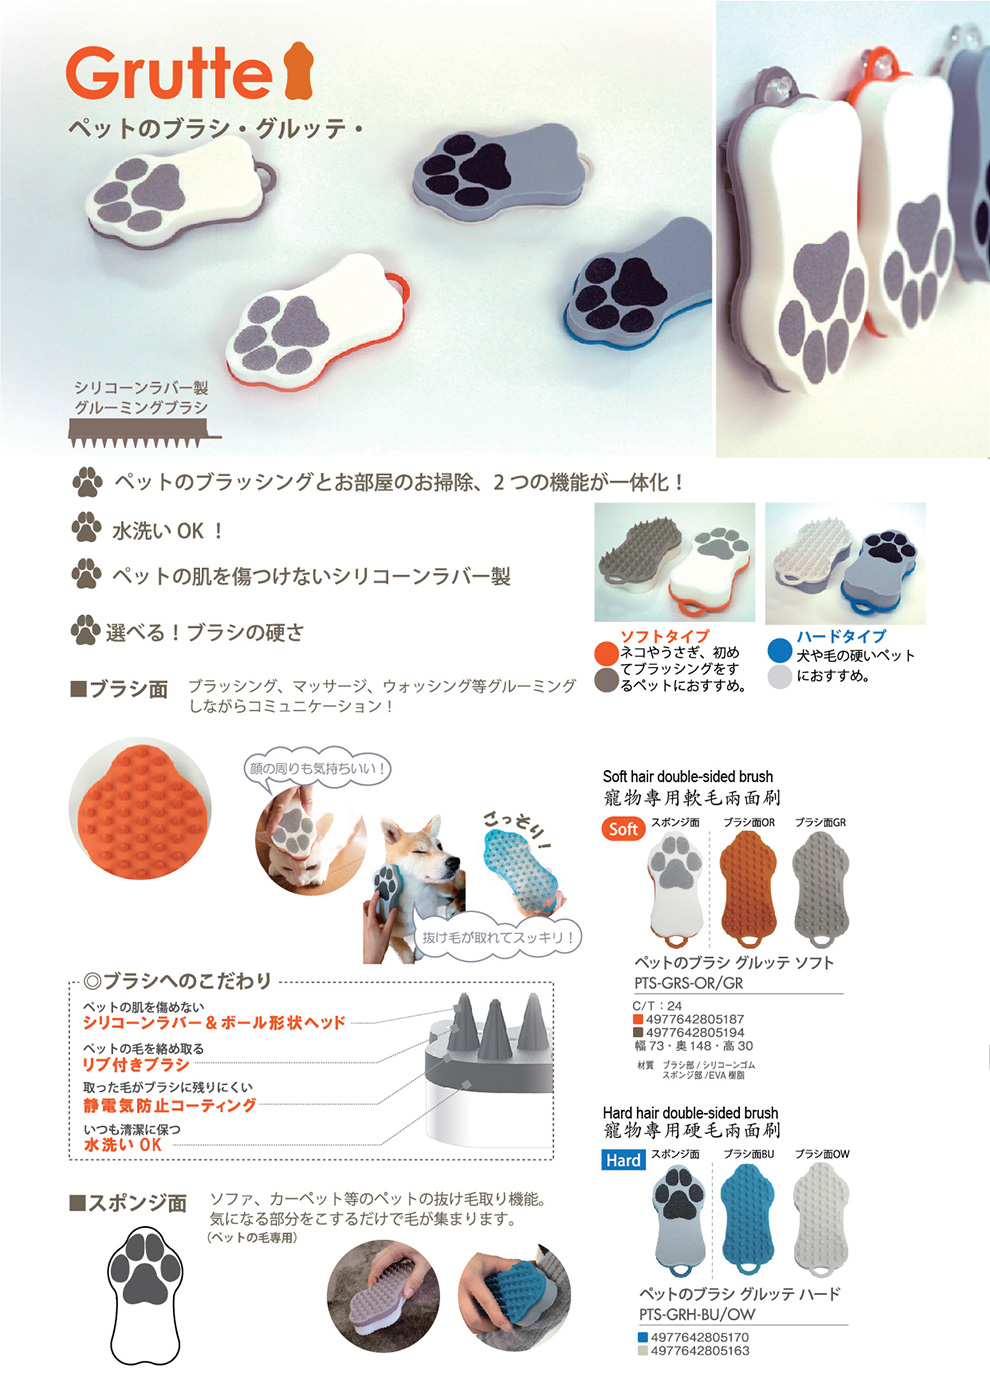 HARIO, Pet goods, Made in Japan, Dog, Cat, Grutte, soft, hard, PTS-GRS-OR, PTS-GRS-GR, PTS-GRH-BU, PTS-GRH-OW